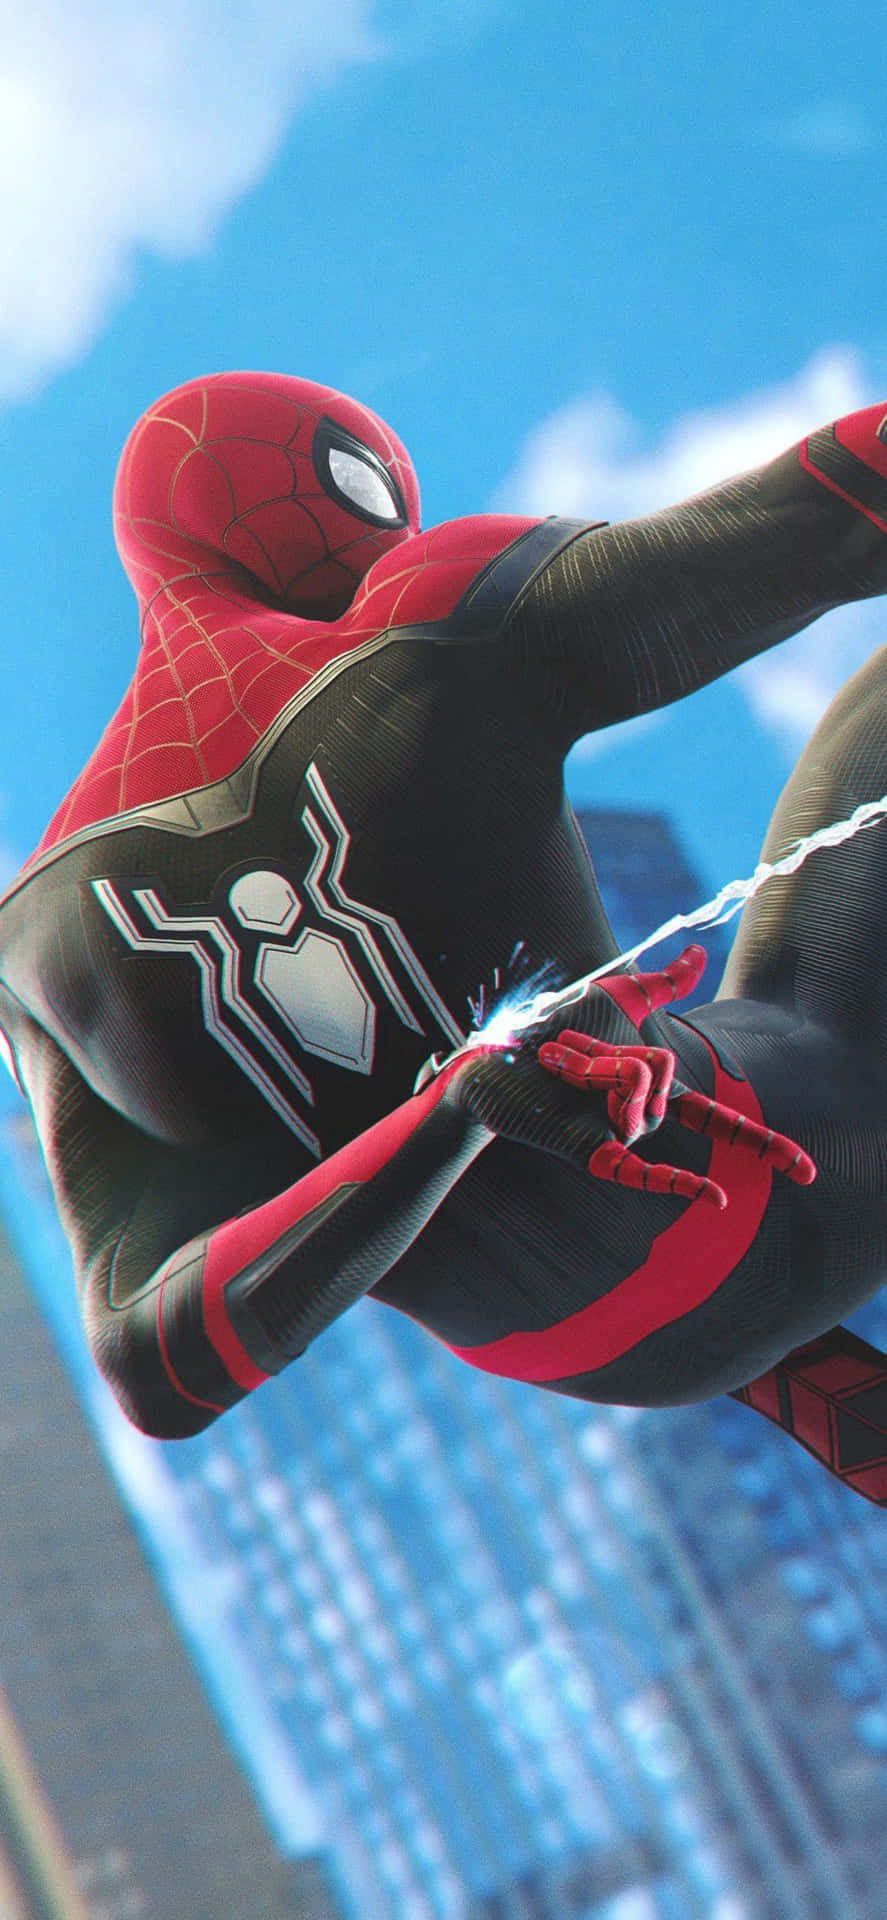 Spider Man feeling cool, calm and collected Wallpaper